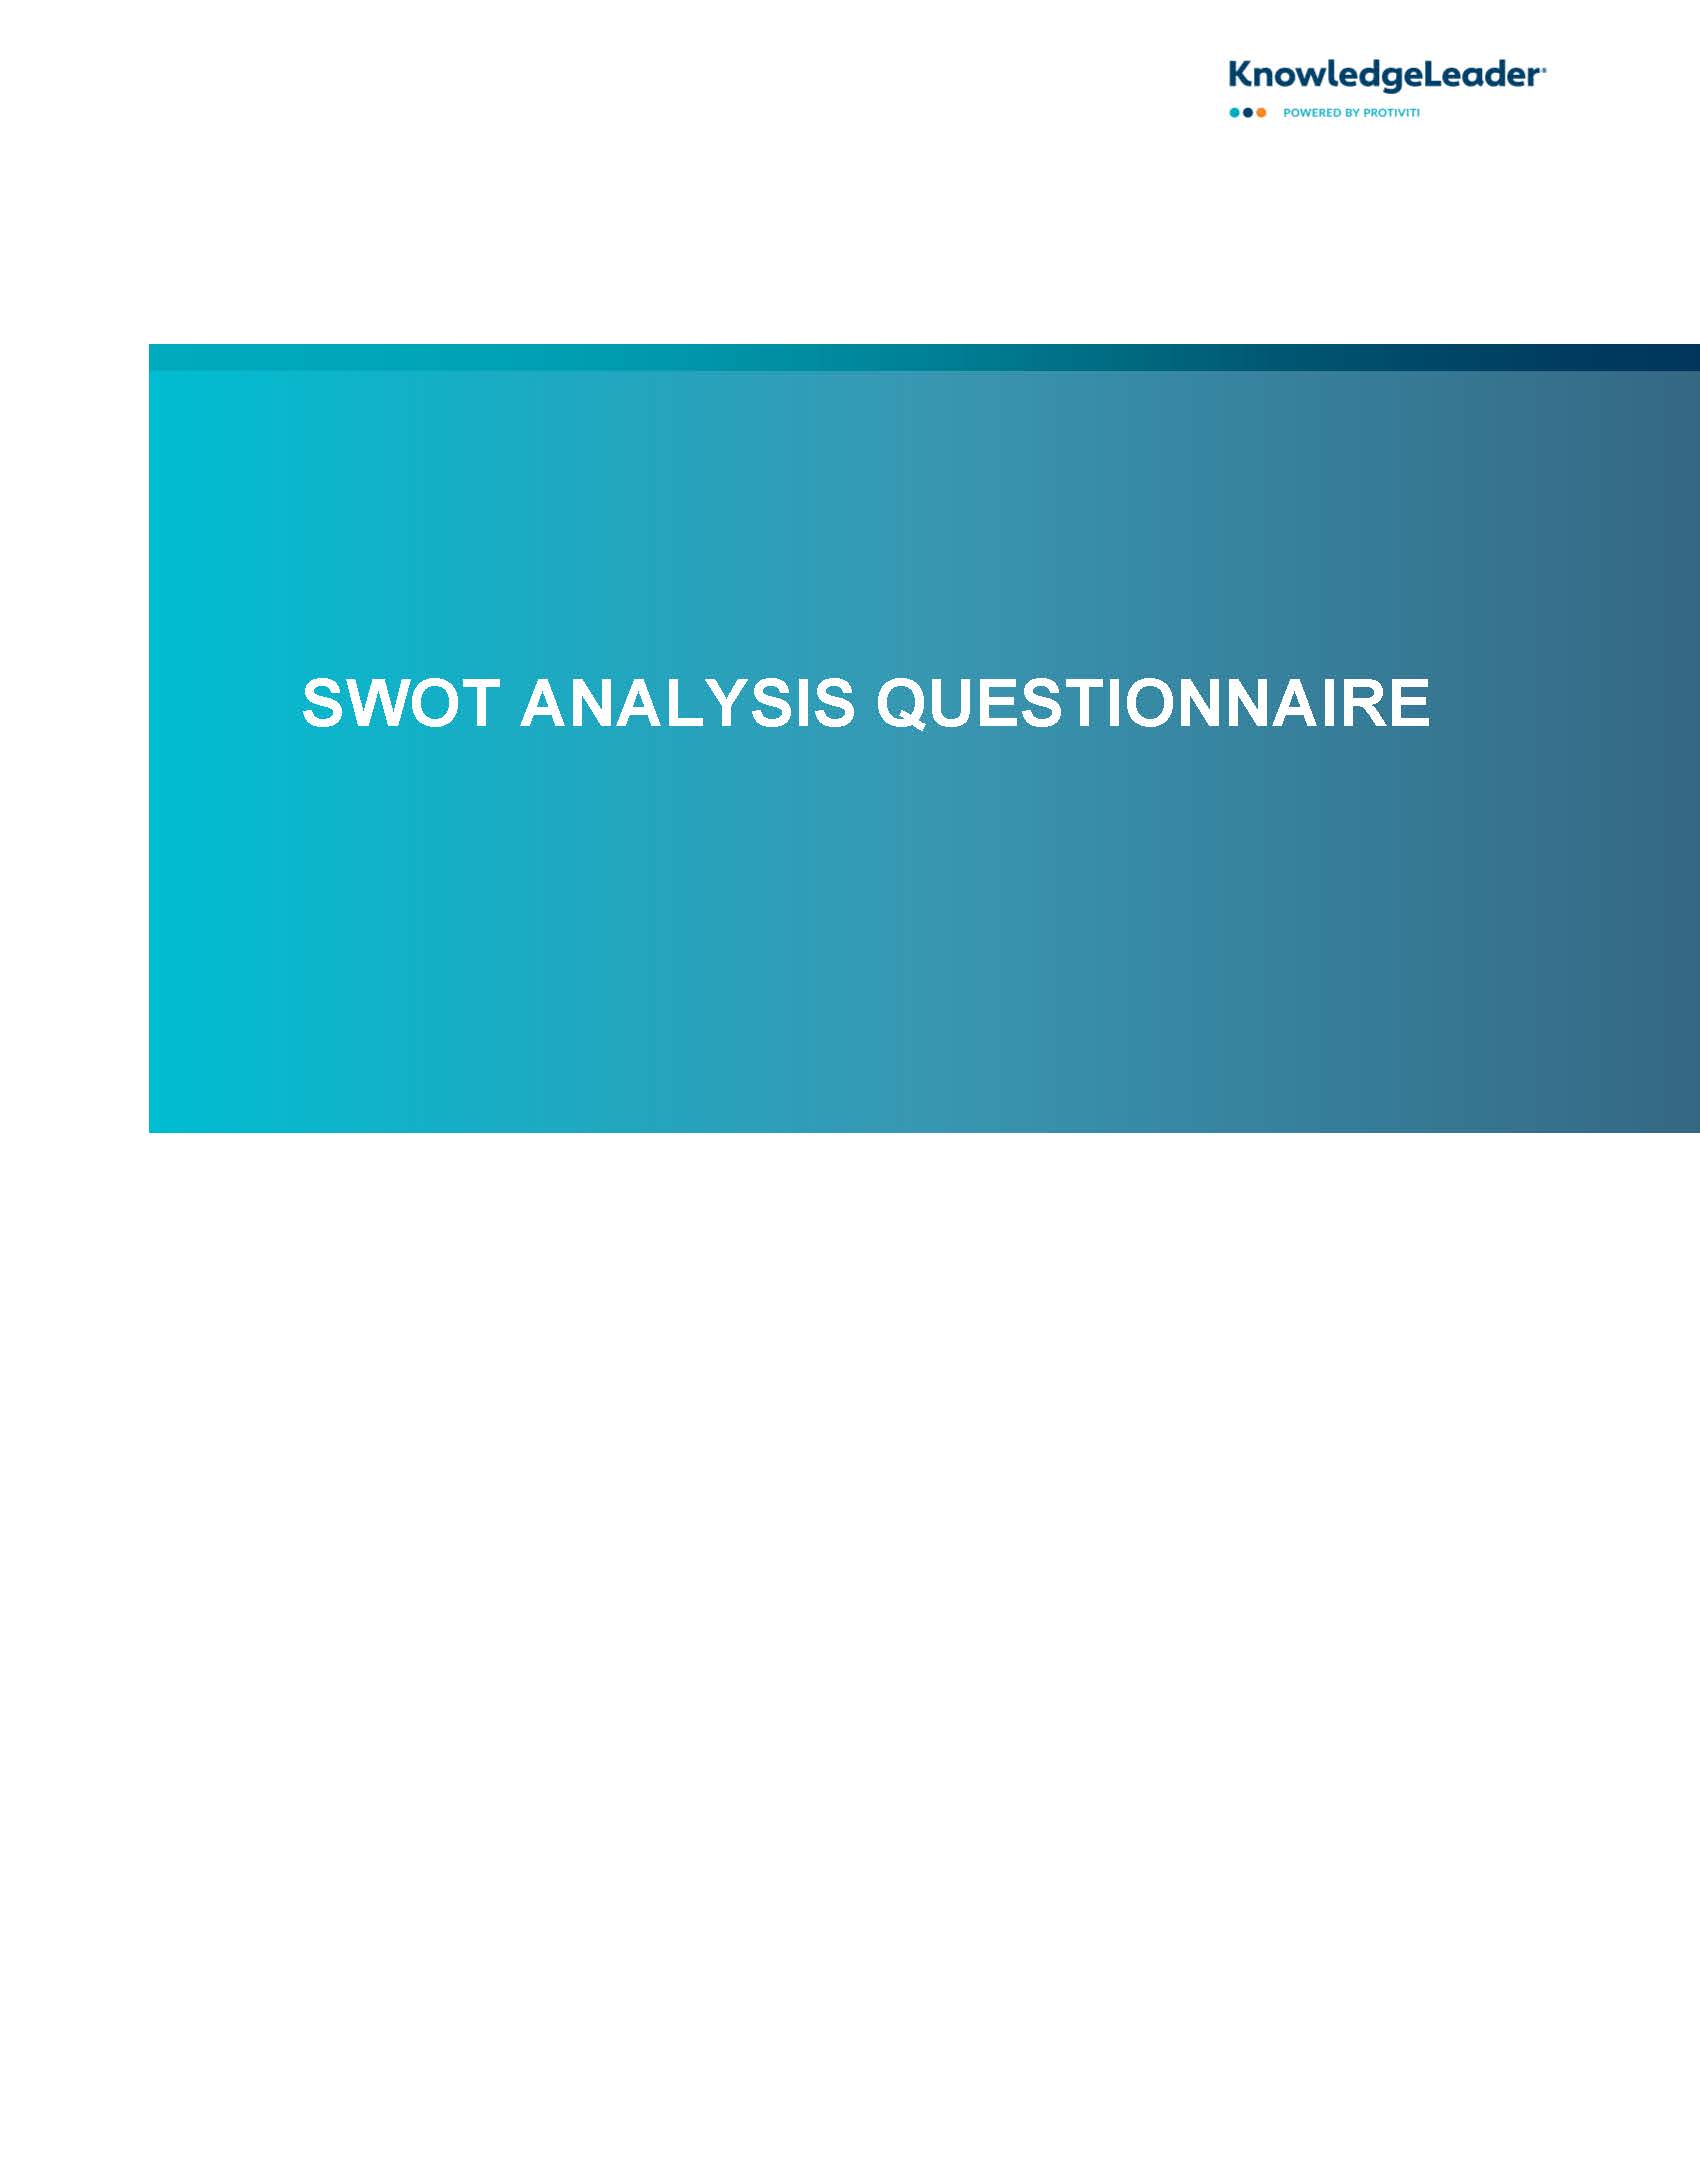 Screenshot of the first page of SWOT Analysis Questionnaire